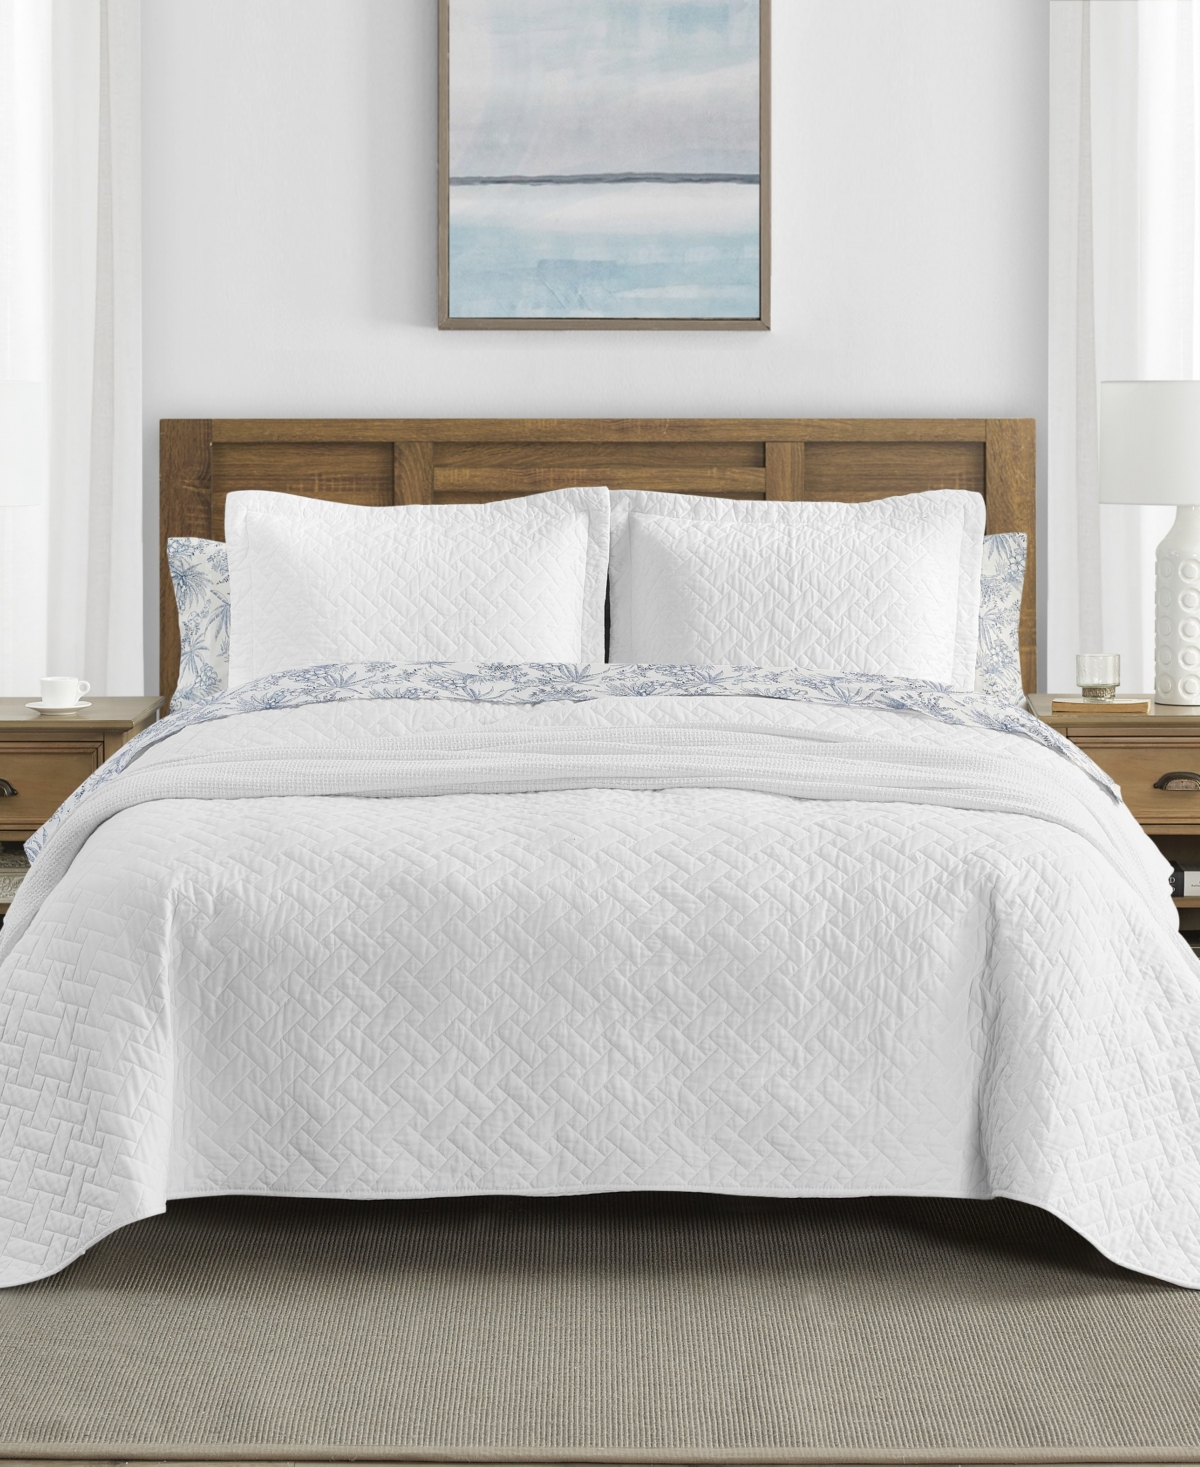 UPC 883893684959 product image for Tommy Bahama Solid Raffia Quilt Set, Full/Queen Bedding | upcitemdb.com